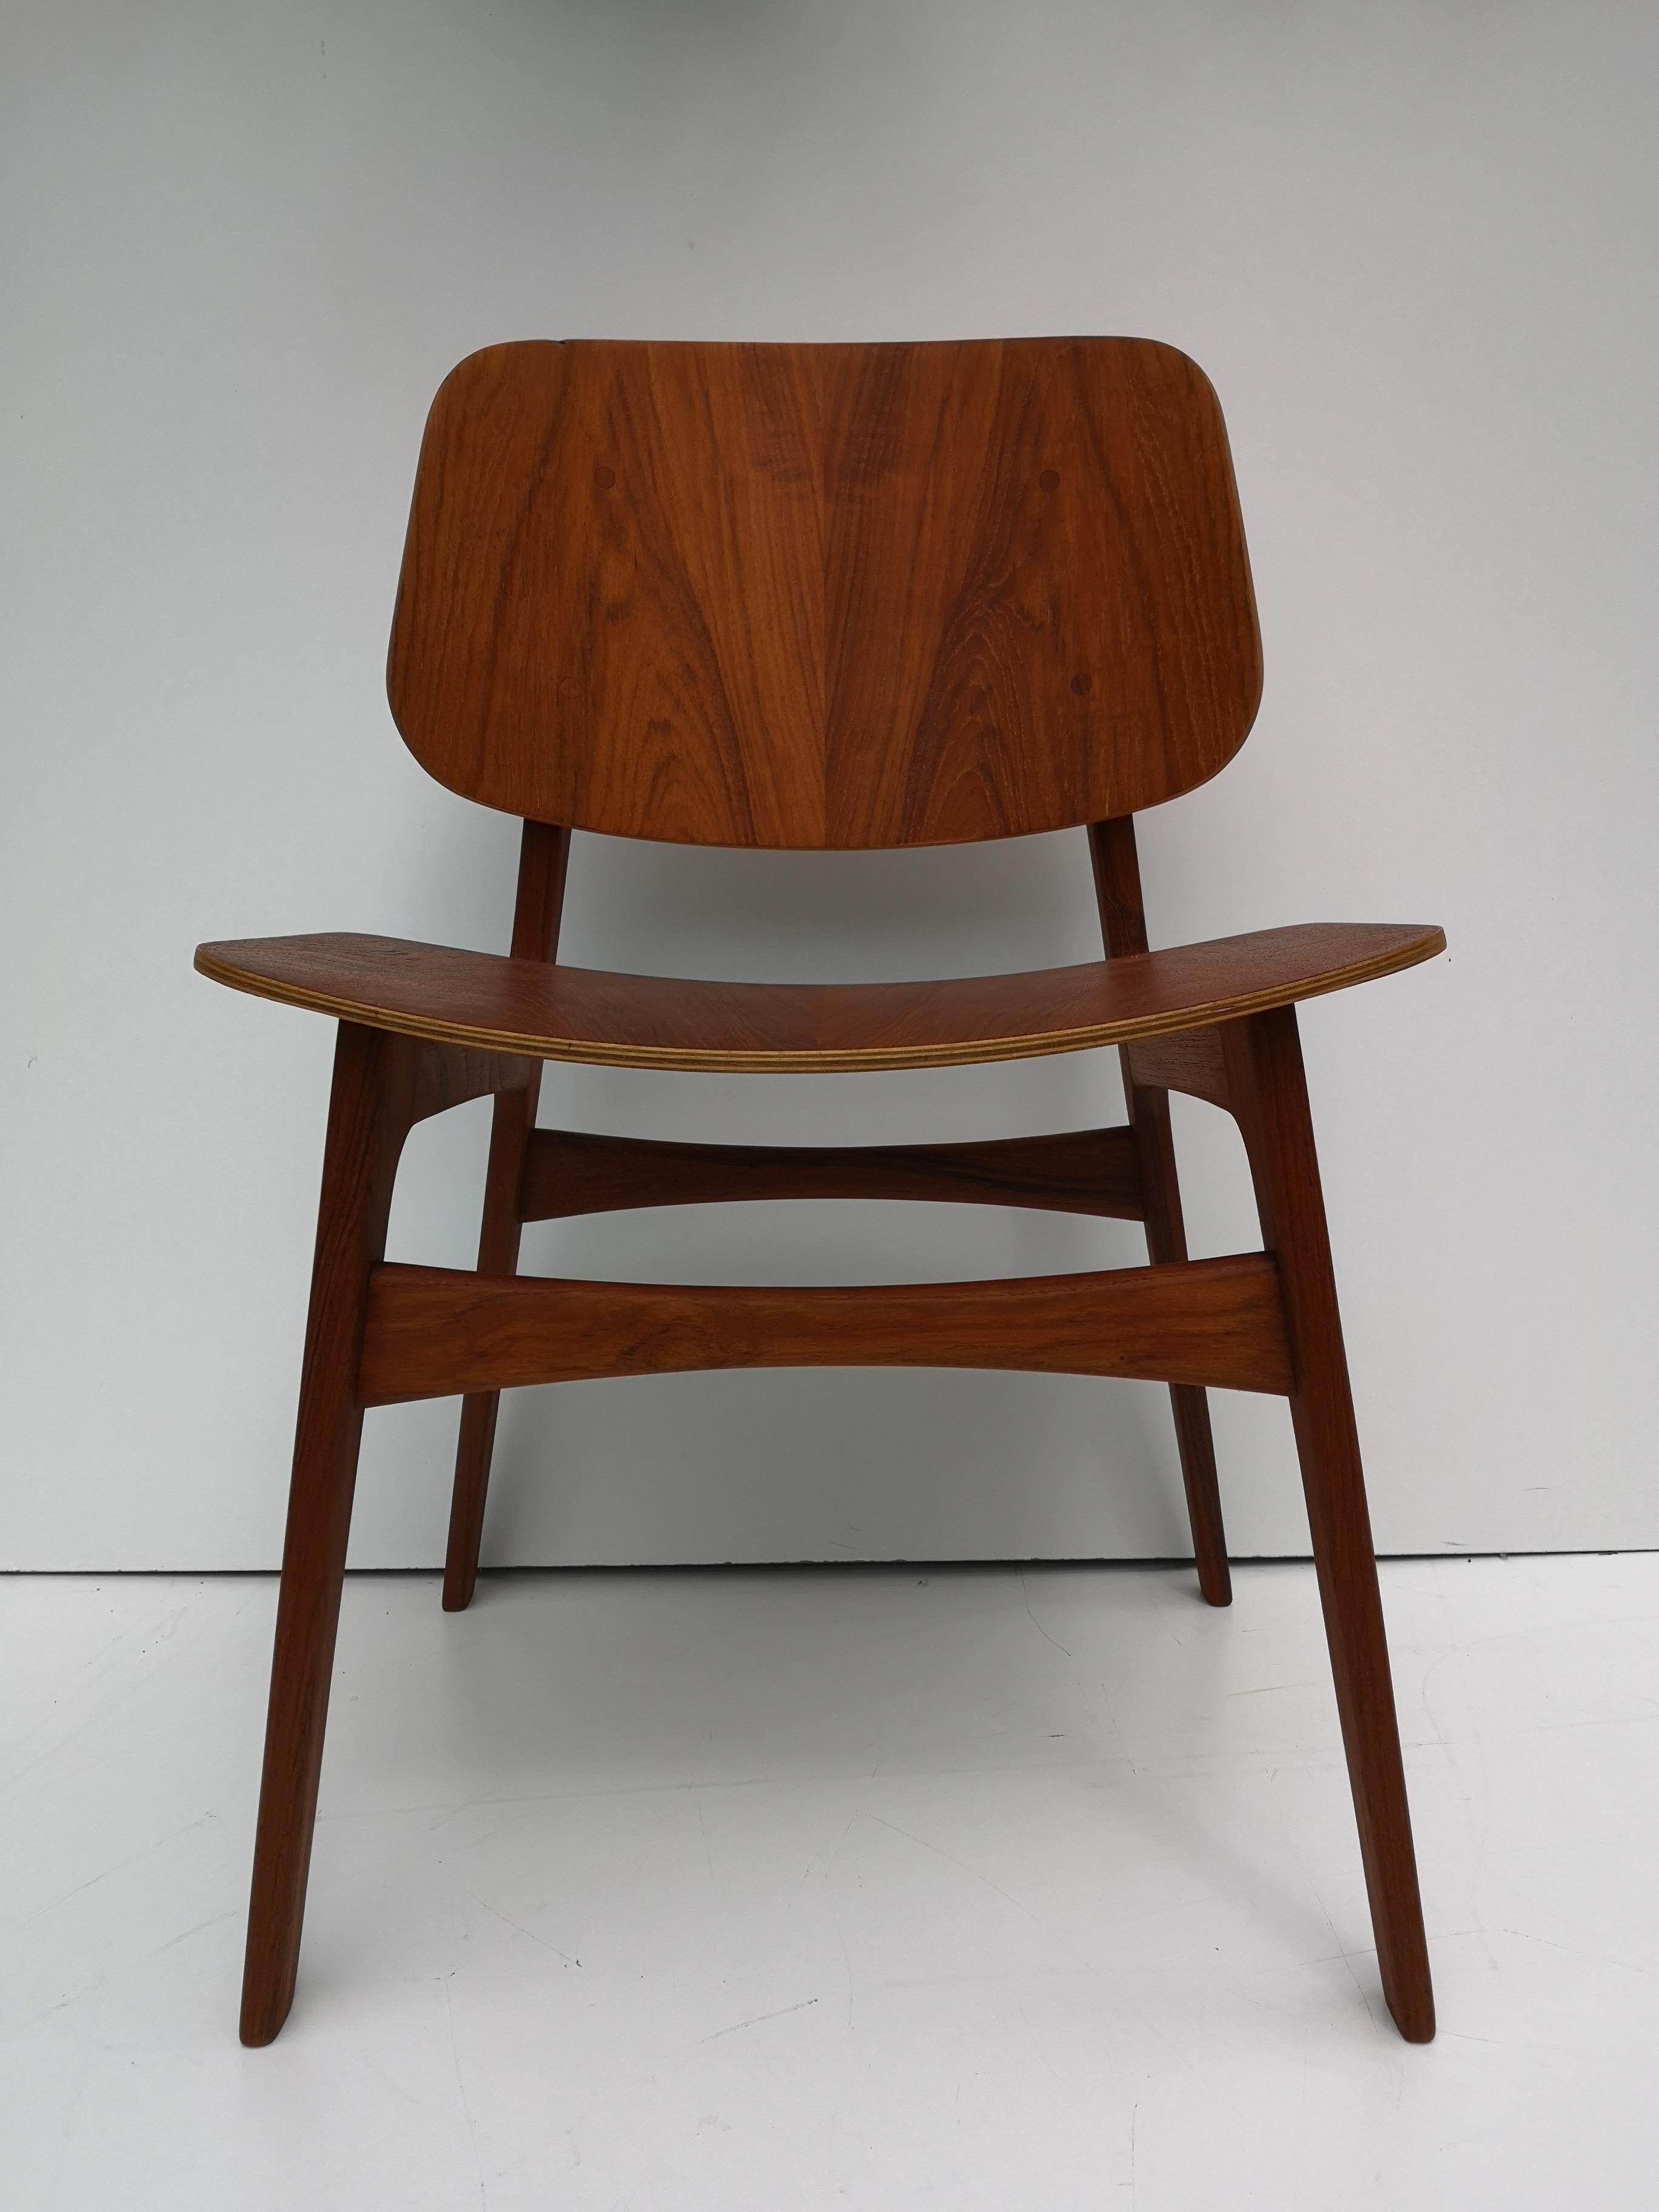 The Model 122 chair by Borge Mogensen for Soborg Mobelfabrik features high quality craftsmanship, timeless lines, and a very comfortable form. This particular model is the less common teak model (frame and seat), is in good condition, and has label